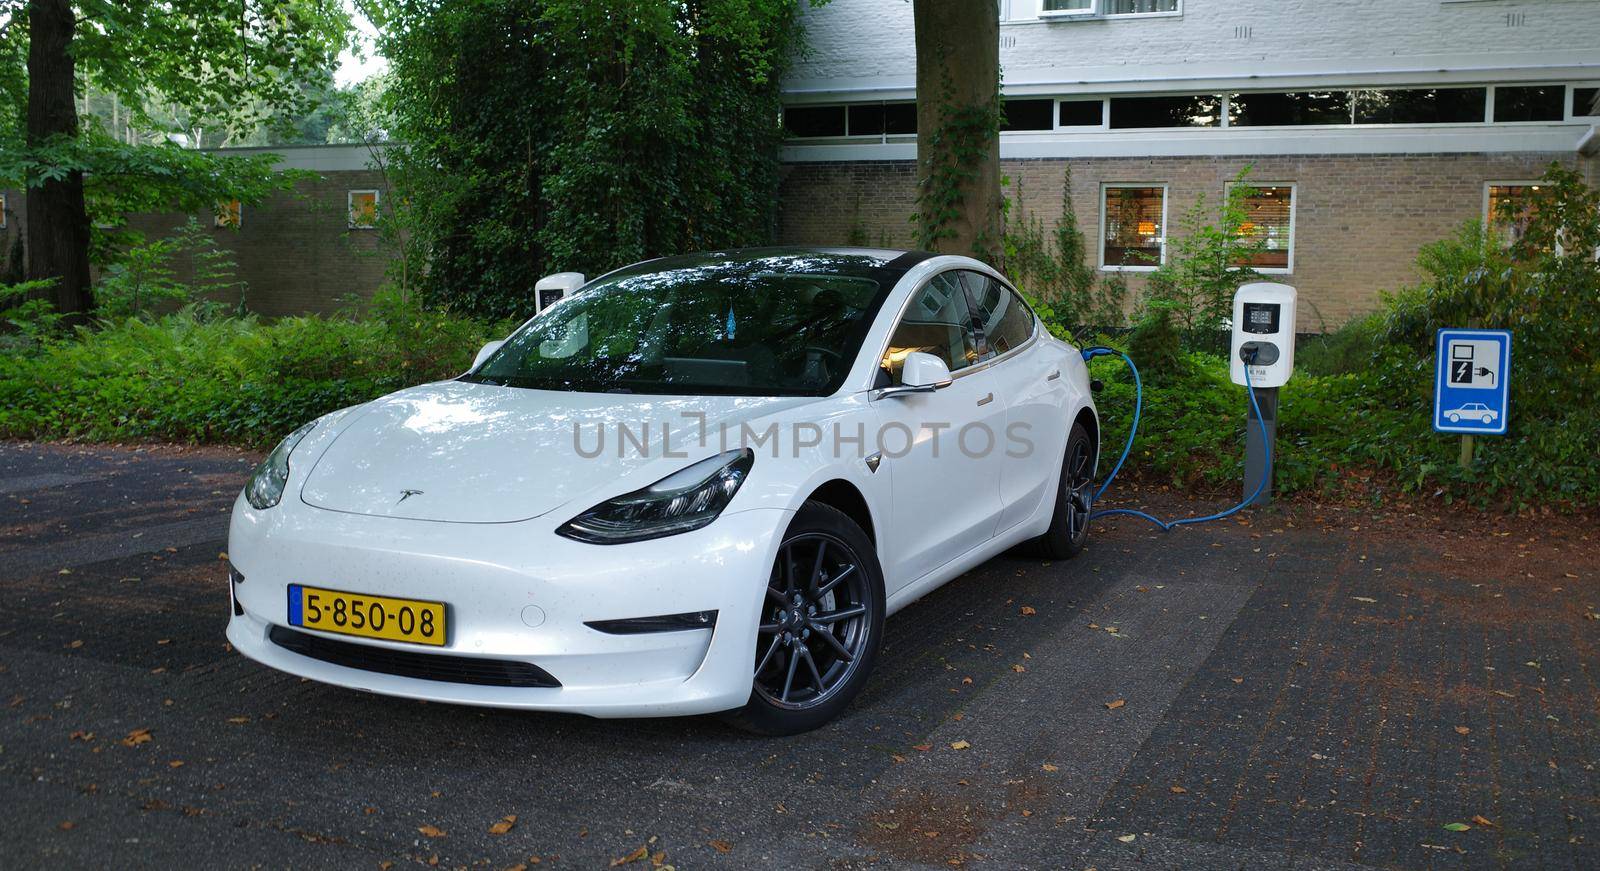 Amersfoort, Netherlands - August 28 2022 A white Testa Model 3 being charged. This is a compact executive sedan that is battery powered. It's at the moment the world's top selling electric car